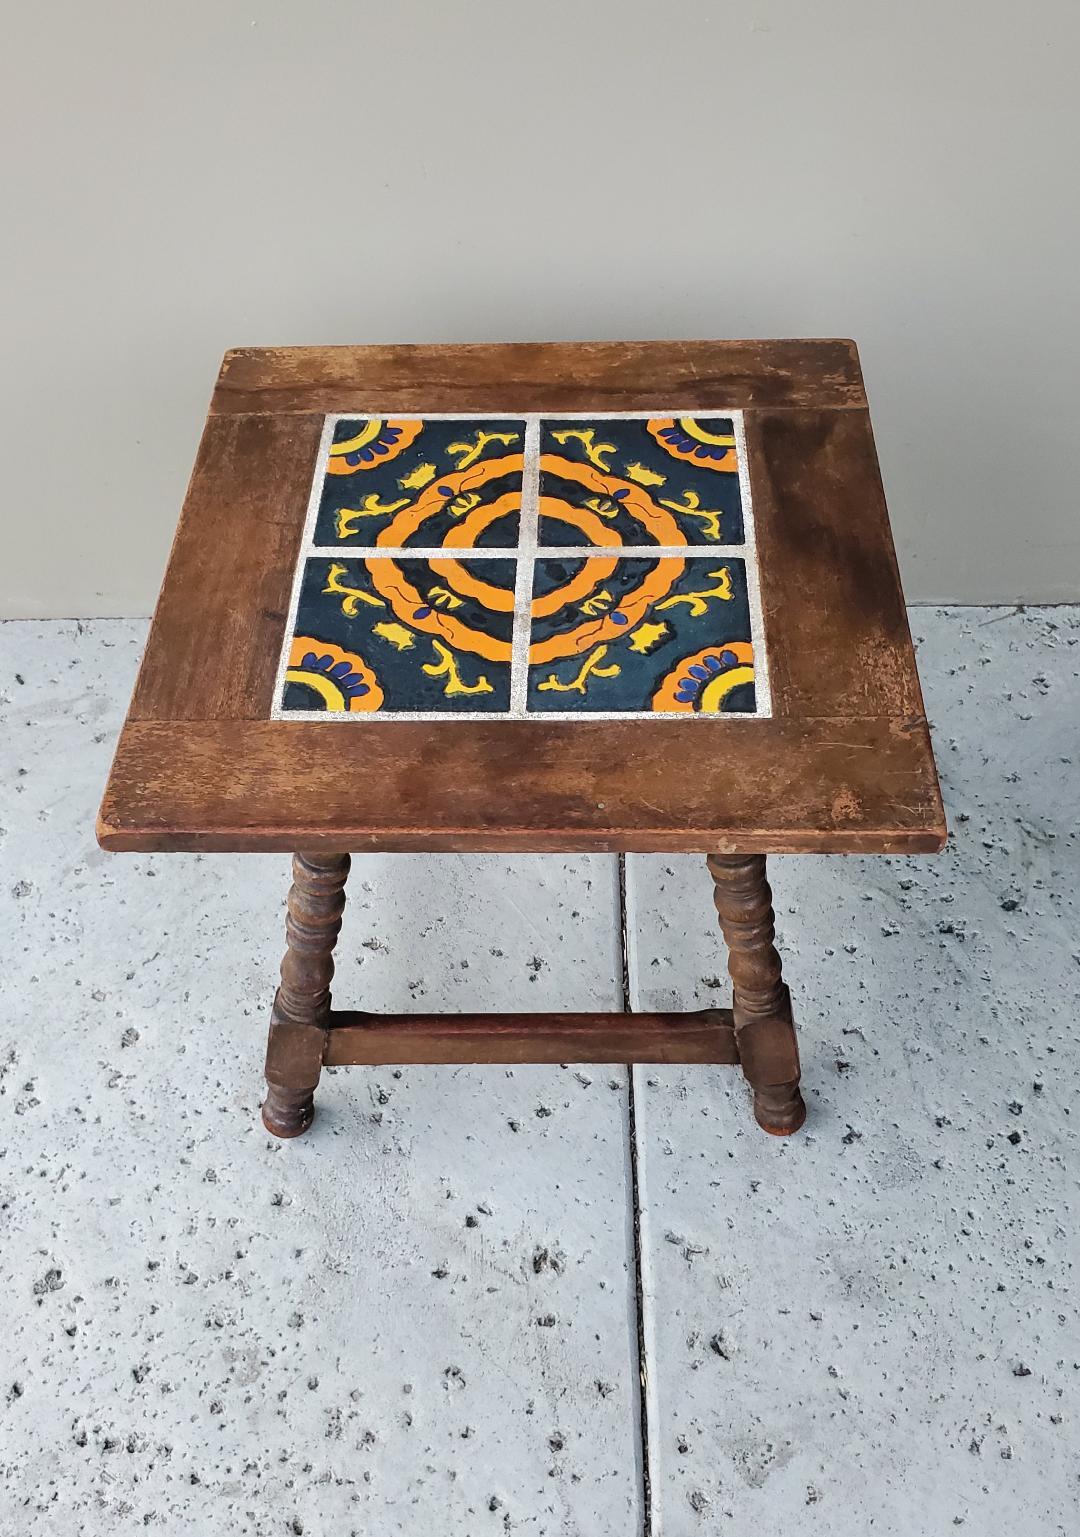 Early 20th Century Catalina Tile Table Mission Craftsman Arts & Craft Spanish  In Good Condition For Sale In Monrovia, CA